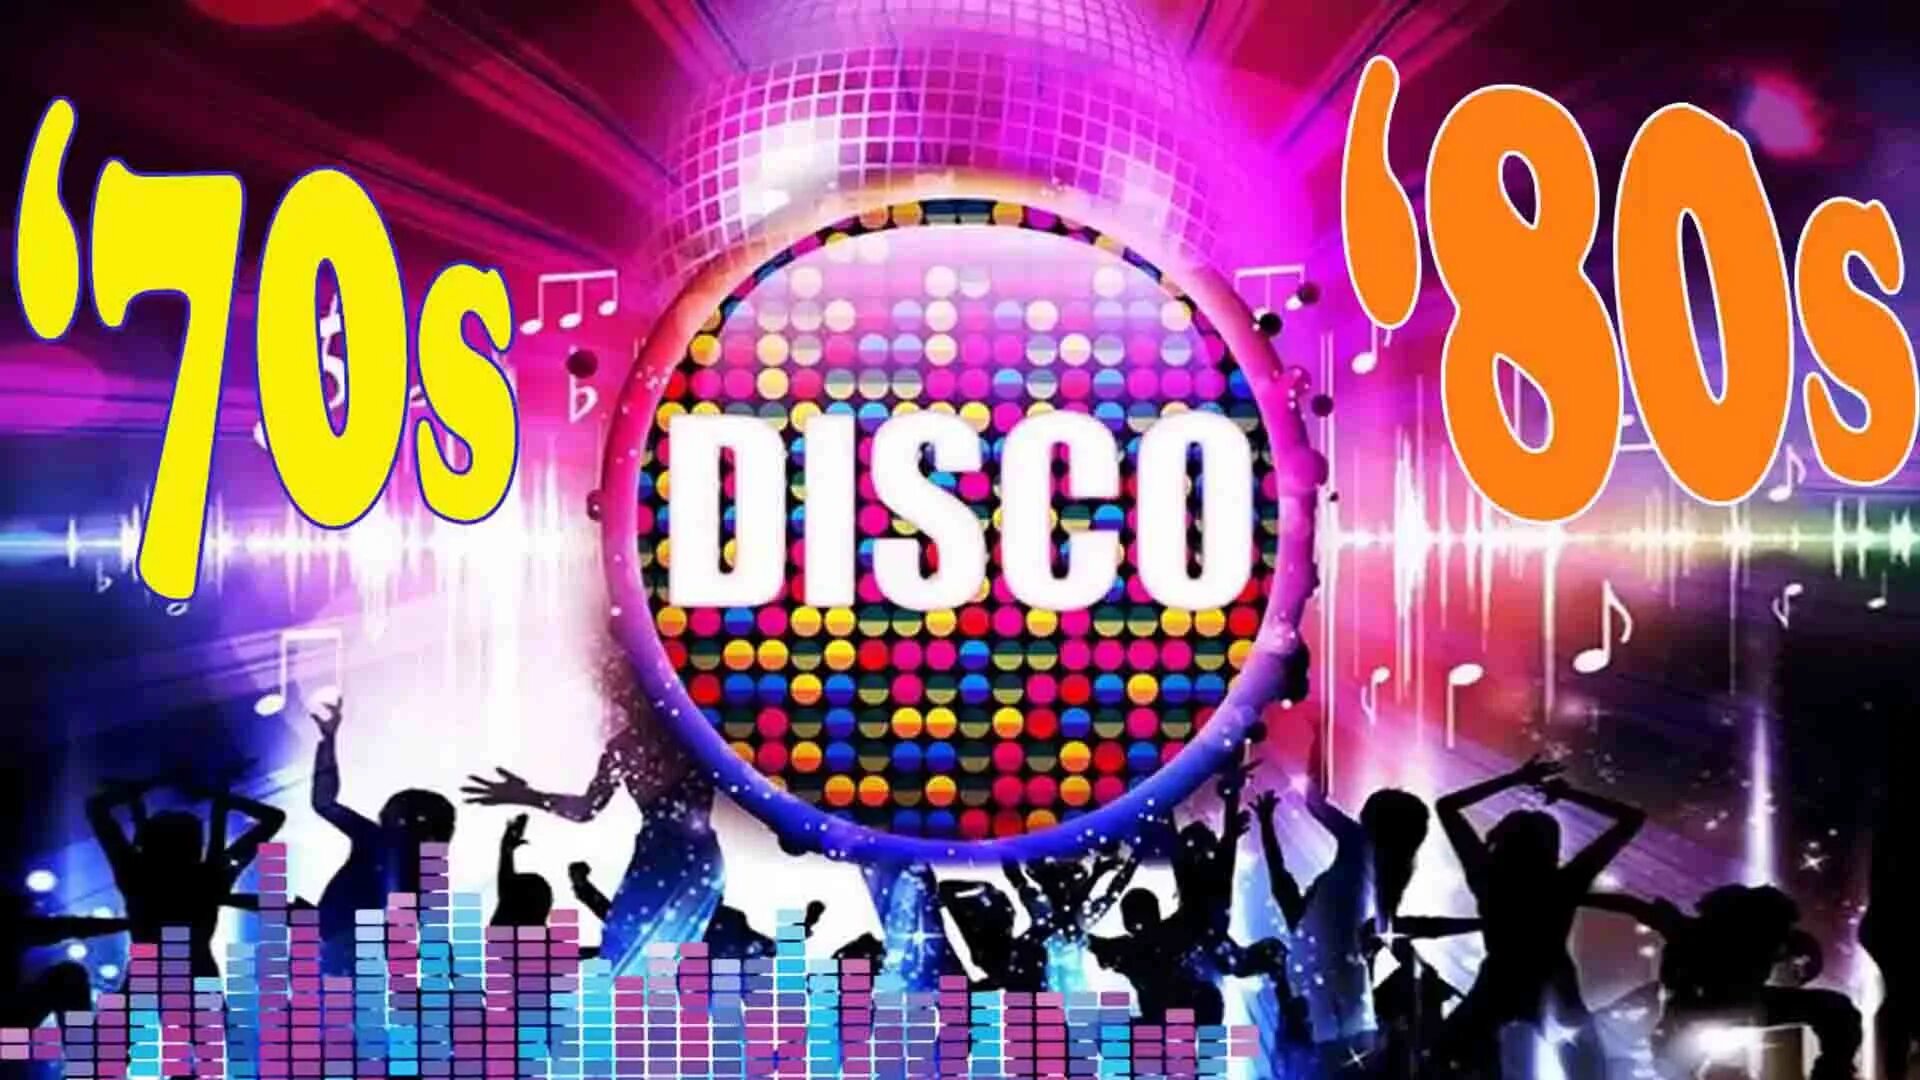 Диско 90 фон. Диско 70 фон. Диско ночь. 70s and 80s Disco Legend - Golden Disco Greatest Hits 70s and 80s best Disco Songs of 70s and 80s" на.